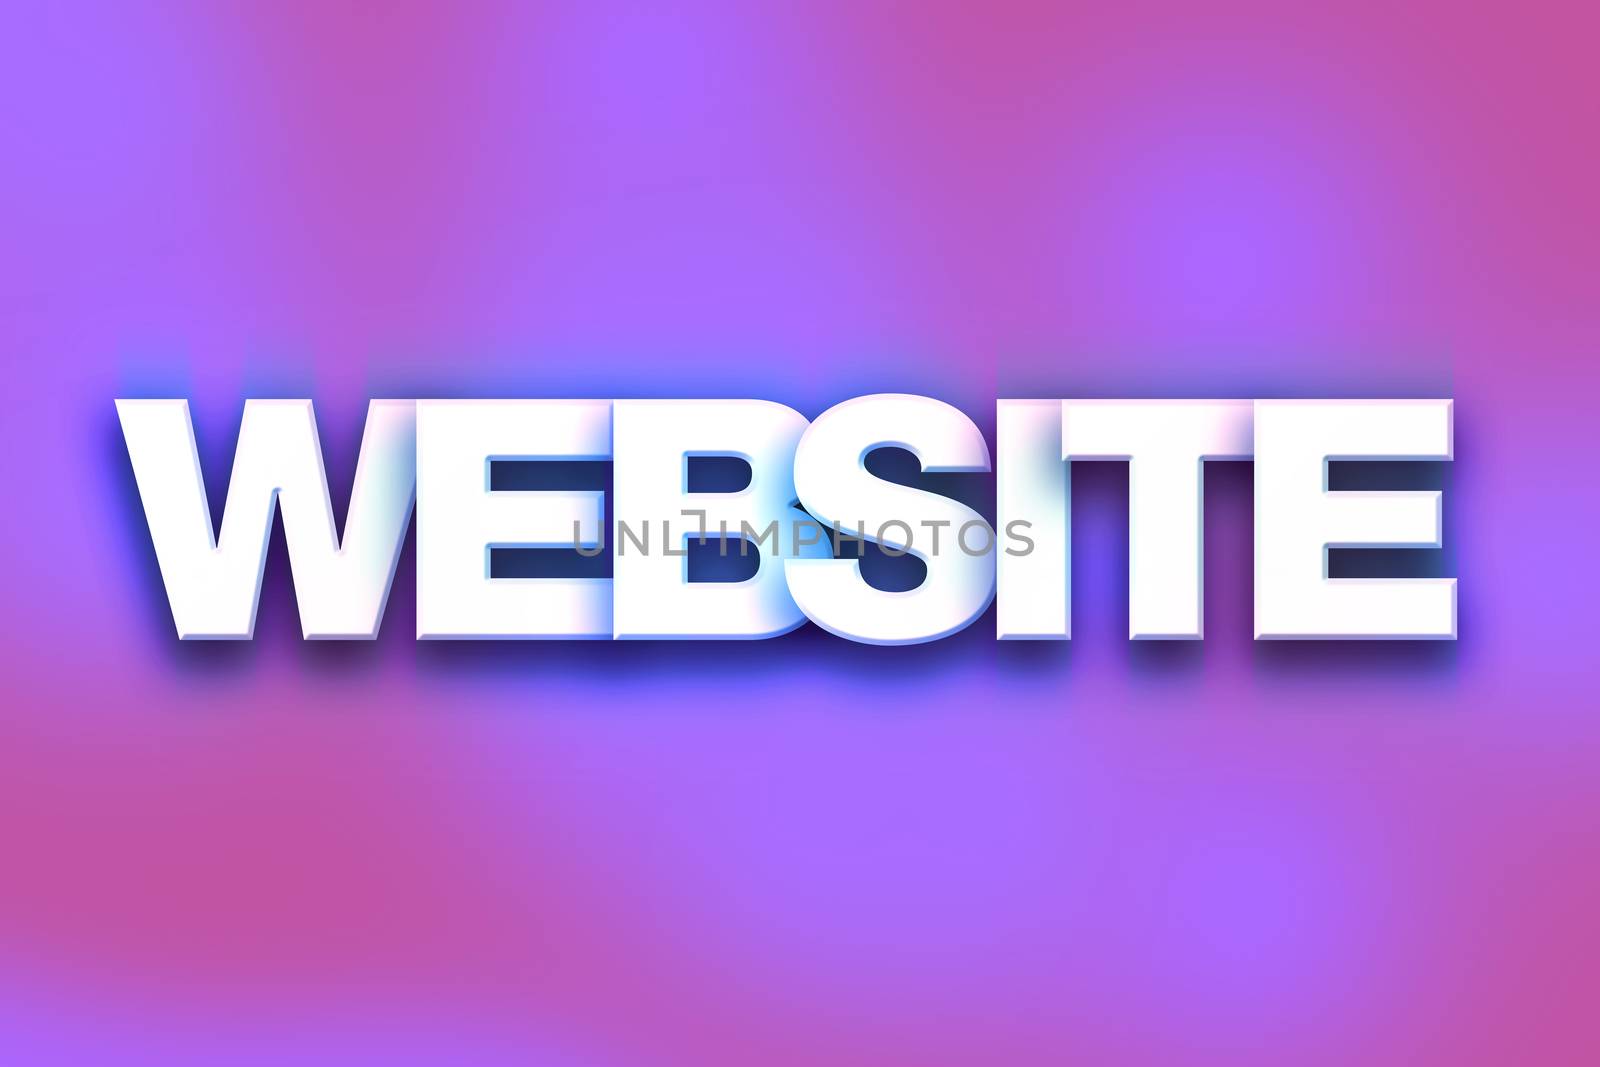 The word "Website" written in white 3D letters on a colorful background concept and theme.